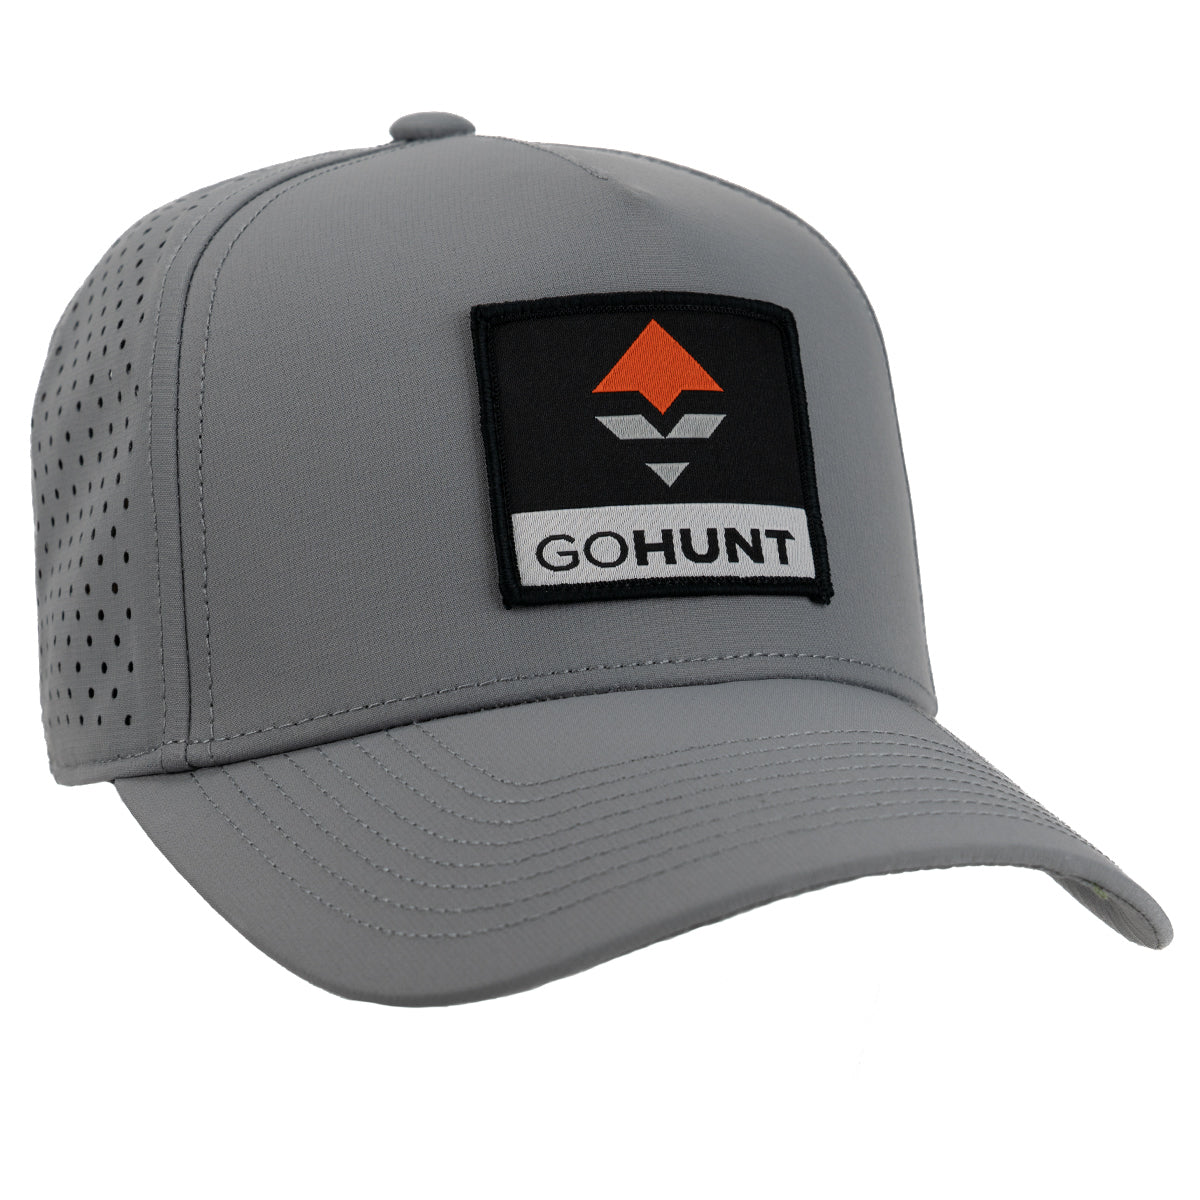 GOHUNT Hydra Hat in Charcoal by GOHUNT | GOHUNT - GOHUNT Shop